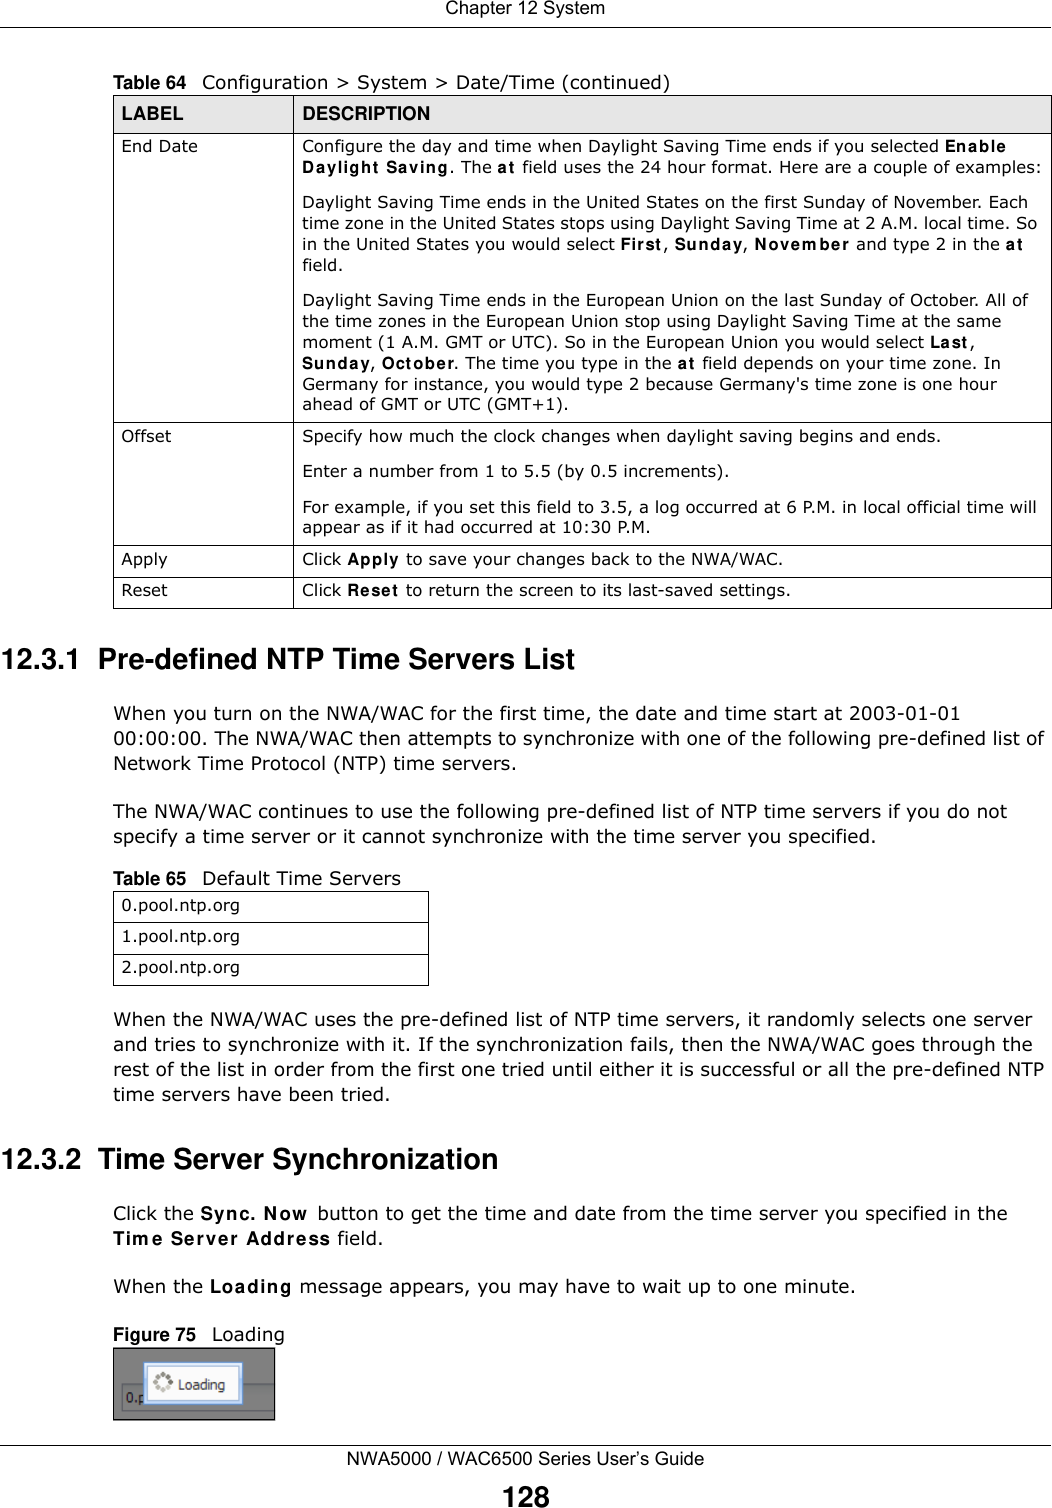 Chapter 12 SystemNWA5000 / WAC6500 Series User’s Guide12812.3.1  Pre-defined NTP Time Servers ListWhen you turn on the NWA/WAC for the first time, the date and time start at 2003-01-01 00:00:00. The NWA/WAC then attempts to synchronize with one of the following pre-defined list of Network Time Protocol (NTP) time servers.The NWA/WAC continues to use the following pre-defined list of NTP time servers if you do not specify a time server or it cannot synchronize with the time server you specified. When the NWA/WAC uses the pre-defined list of NTP time servers, it randomly selects one server and tries to synchronize with it. If the synchronization fails, then the NWA/WAC goes through the rest of the list in order from the first one tried until either it is successful or all the pre-defined NTP time servers have been tried.12.3.2  Time Server SynchronizationClick the Sync. N ow  button to get the time and date from the time server you specified in the Tim e Server  Addr ess field.When the Loa ding message appears, you may have to wait up to one minute.Figure 75   LoadingEnd Date Configure the day and time when Daylight Saving Time ends if you selected Ena ble  Daylight  Sa ving. The a t  field uses the 24 hour format. Here are a couple of examples:Daylight Saving Time ends in the United States on the first Sunday of November. Each time zone in the United States stops using Daylight Saving Time at 2 A.M. local time. So in the United States you would select Fir st , Sunday, Novem ber  and type 2 in the at field.Daylight Saving Time ends in the European Union on the last Sunday of October. All of the time zones in the European Union stop using Daylight Saving Time at the same moment (1 A.M. GMT or UTC). So in the European Union you would select La st , Sunday, Oct ob er. The time you type in the at  field depends on your time zone. In Germany for instance, you would type 2 because Germany&apos;s time zone is one hour ahead of GMT or UTC (GMT+1). Offset Specify how much the clock changes when daylight saving begins and ends. Enter a number from 1 to 5.5 (by 0.5 increments). For example, if you set this field to 3.5, a log occurred at 6 P.M. in local official time will appear as if it had occurred at 10:30 P.M.Apply Click Apply to save your changes back to the NWA/WAC.Reset Click Reset to return the screen to its last-saved settings. Table 64   Configuration &gt; System &gt; Date/Time (continued)LABEL DESCRIPTIONTable 65   Default Time Servers0.pool.ntp.org1.pool.ntp.org2.pool.ntp.org